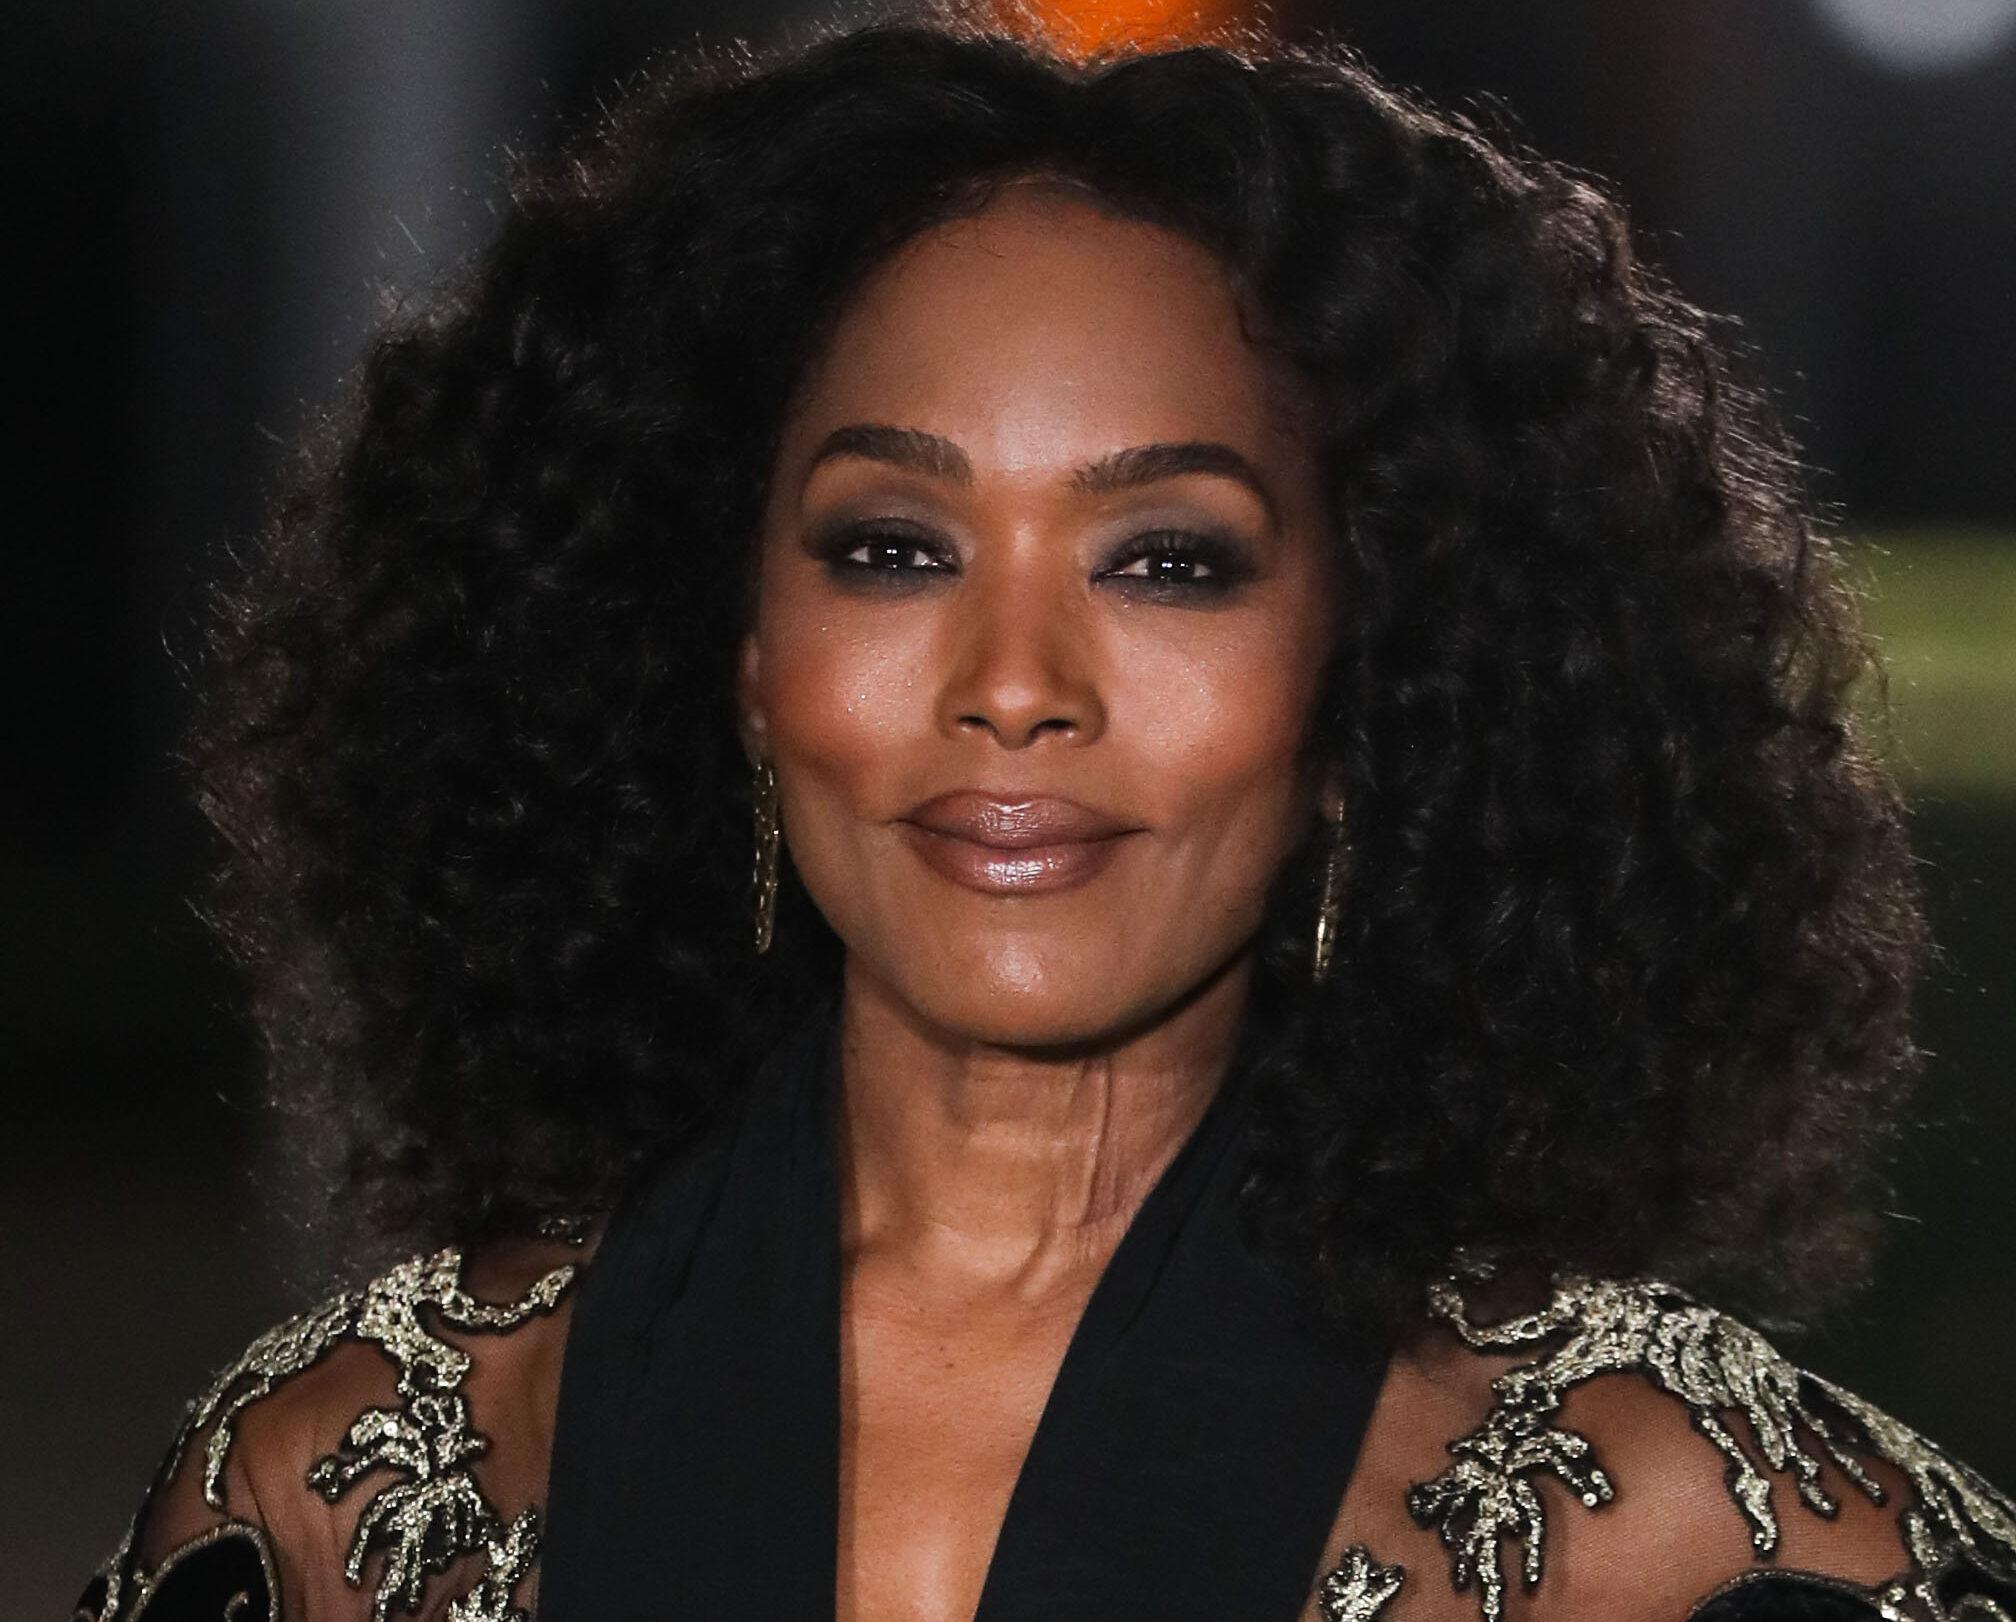 Actress Angela Bassett wearing an outfit by Elie Saab arrives at the Academy Museum of Motion Pictures